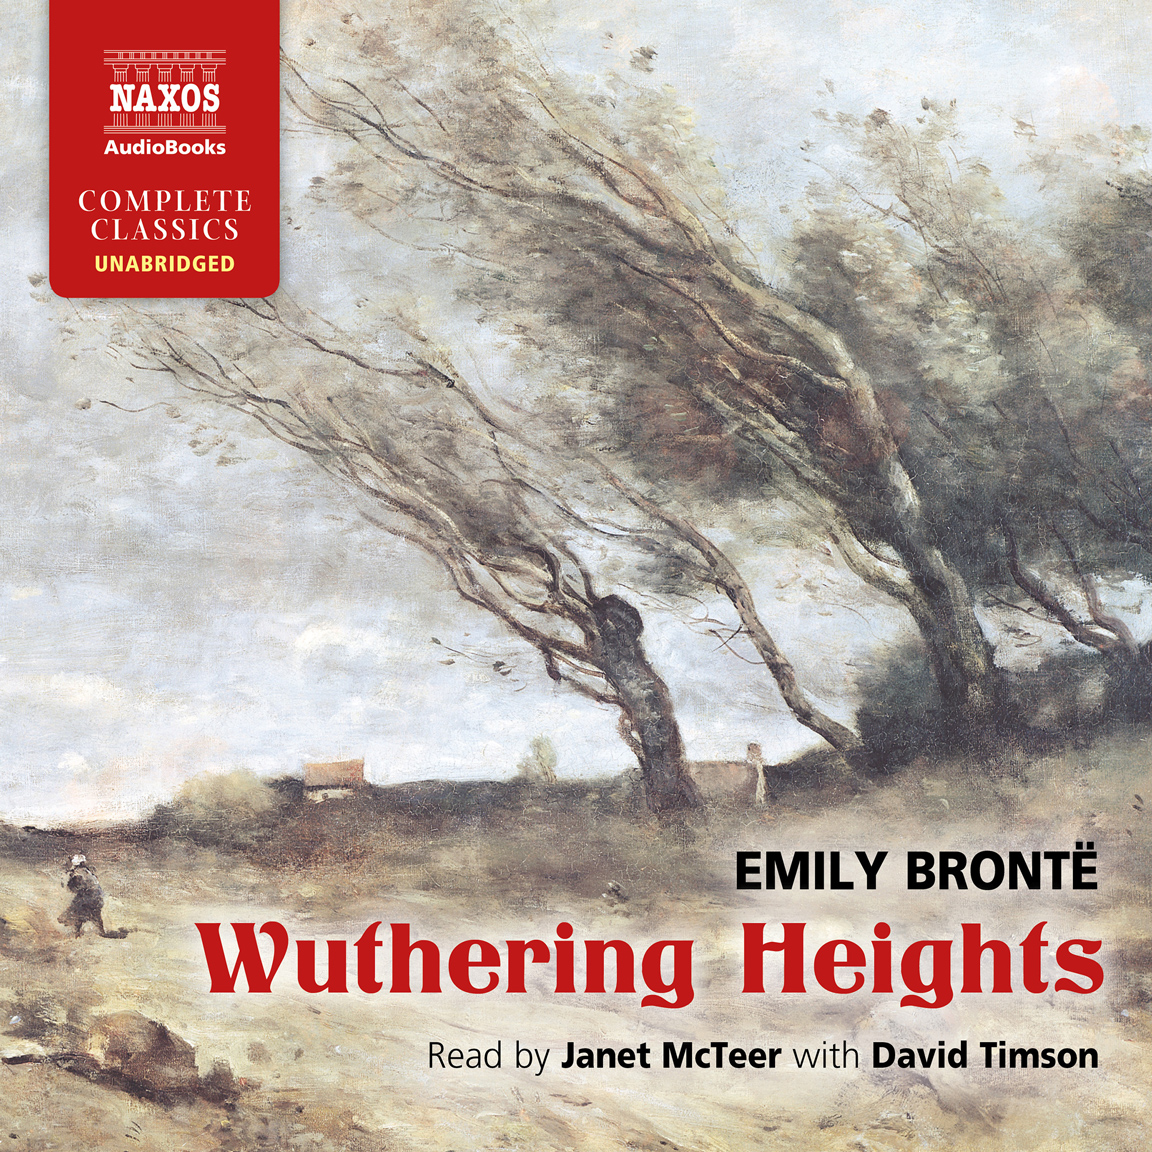 Wuthering Heights (unabridged)